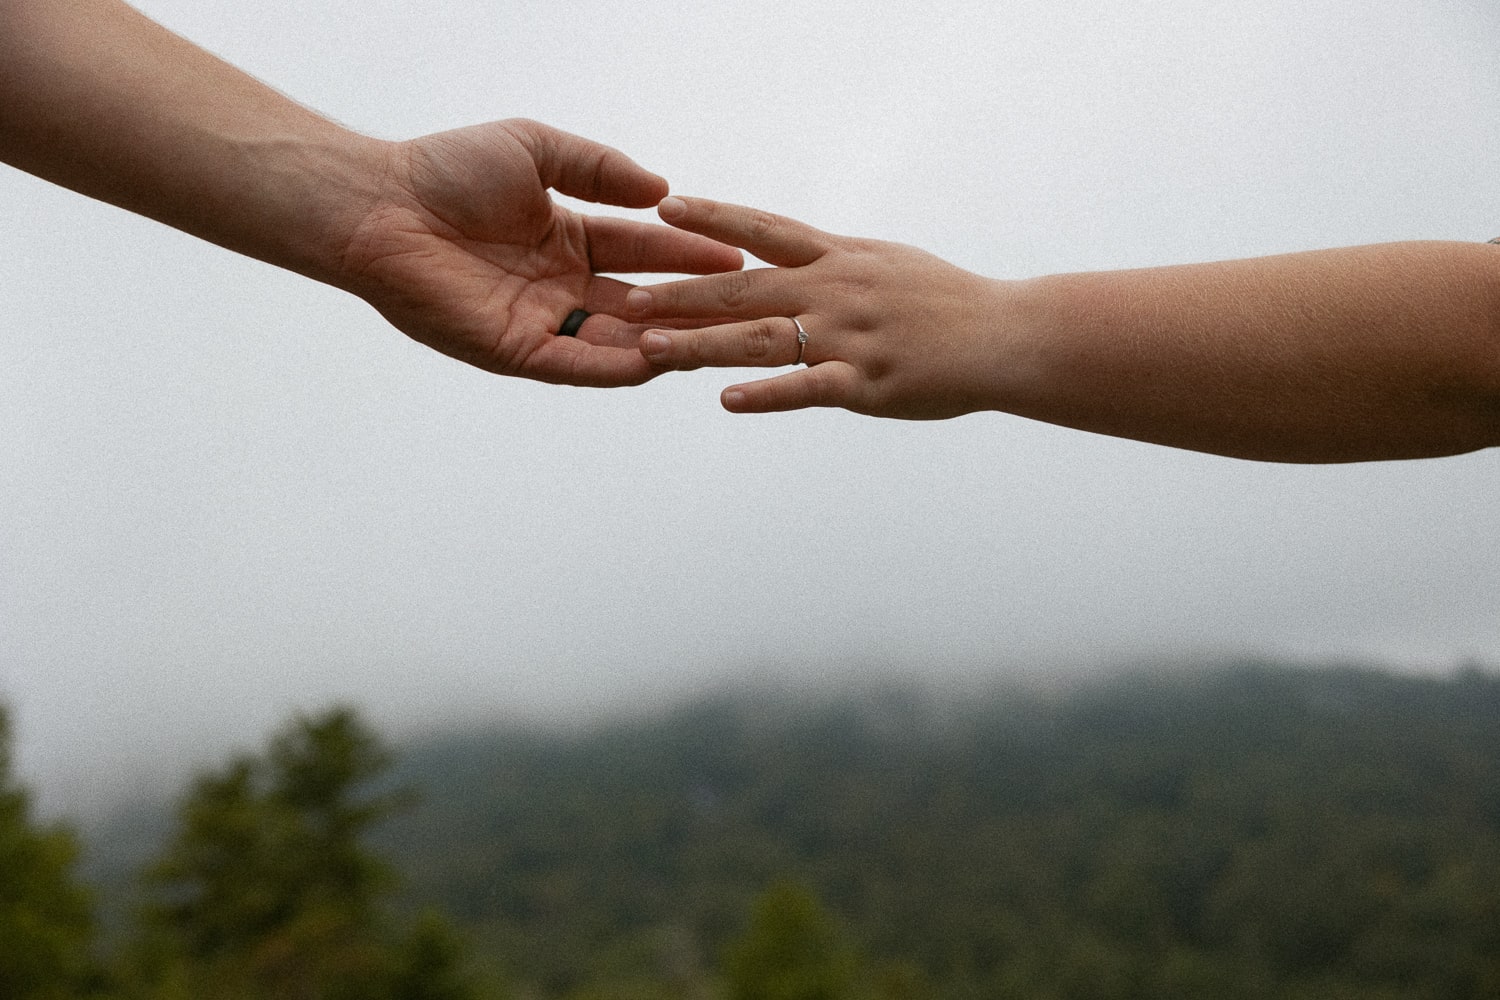 Man and woman hands touching with mountains in the background.